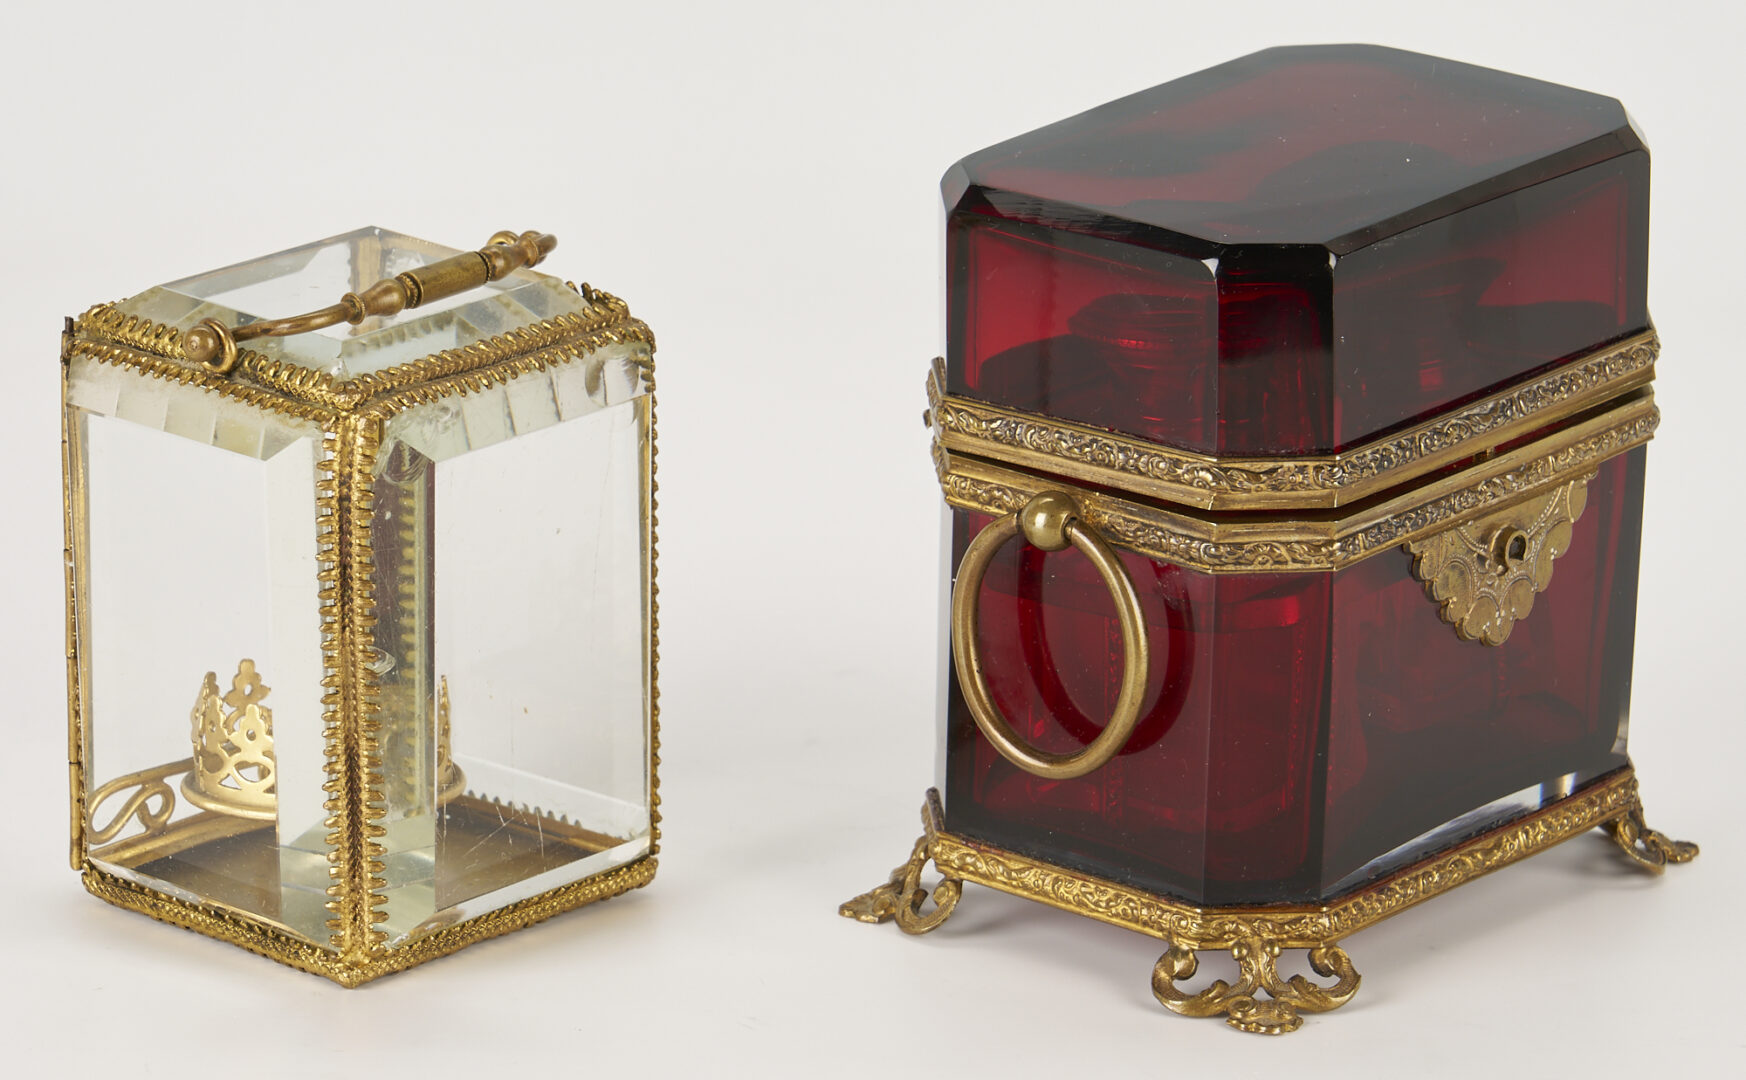 Lot 255: 7 Small Vanity Items incl. Ruby Glass Perfume Tantalus